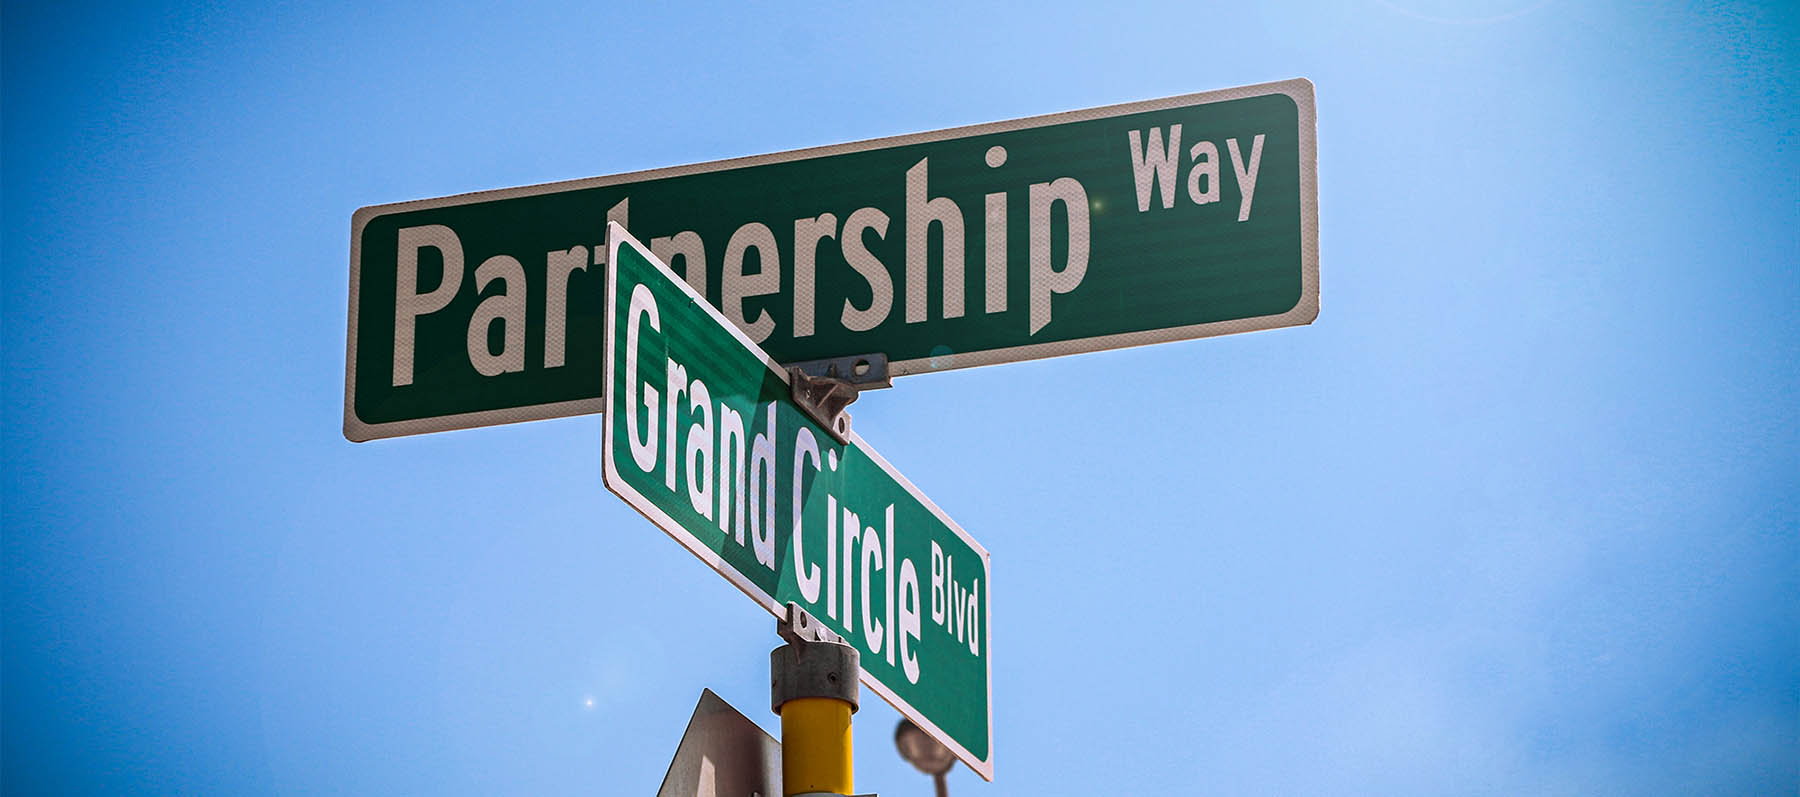 Close up of green metalic street signs that read Partnership Way and GrandCircle Blvd.